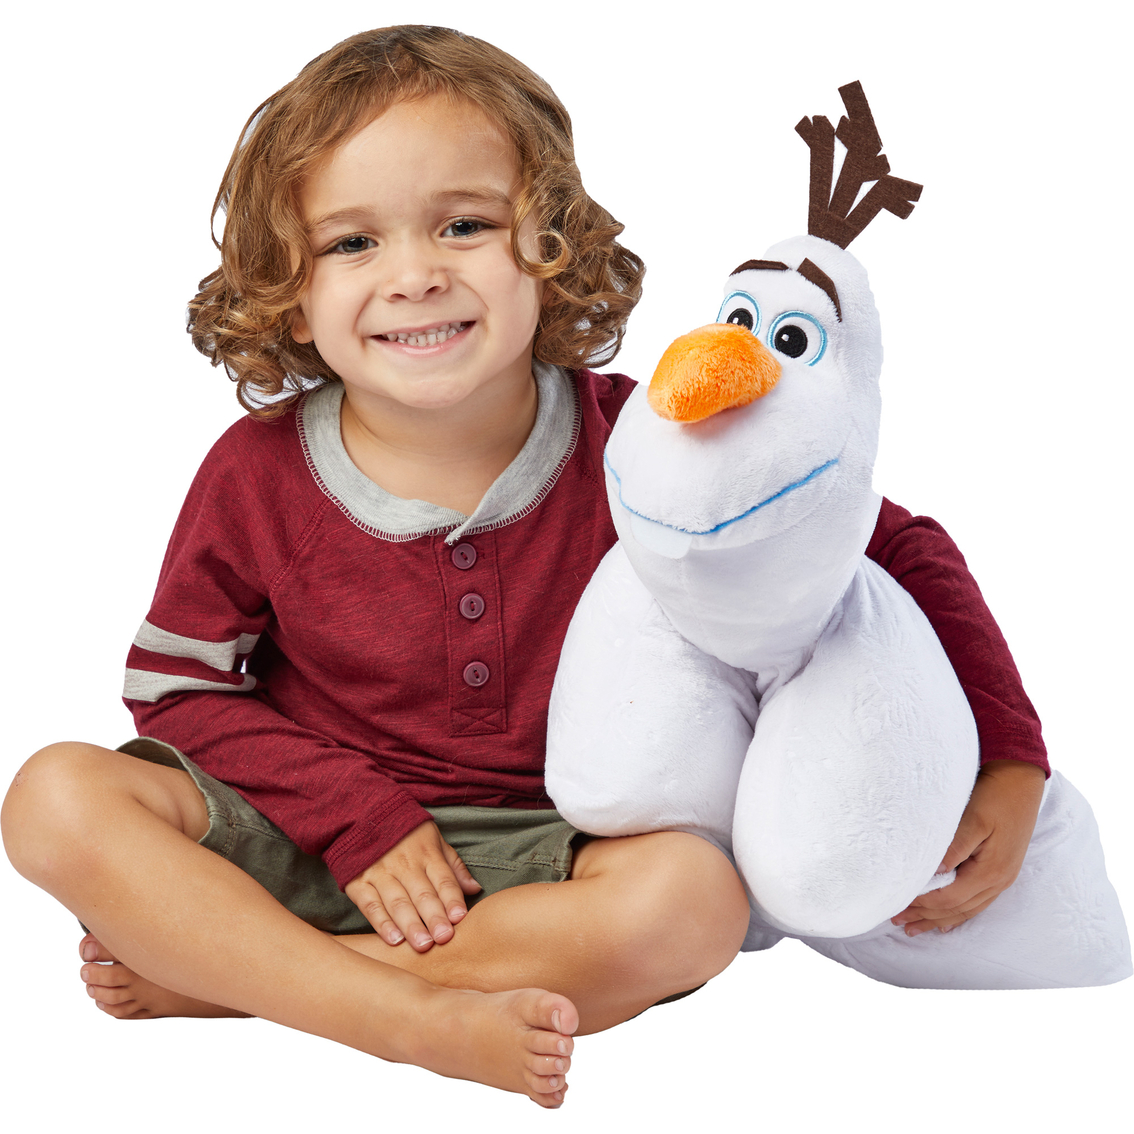  Disney Frozen 2 Small Plush Olaf, Officially Licensed Kids Toys  for Ages 3 Up by Just Play : Toys & Games